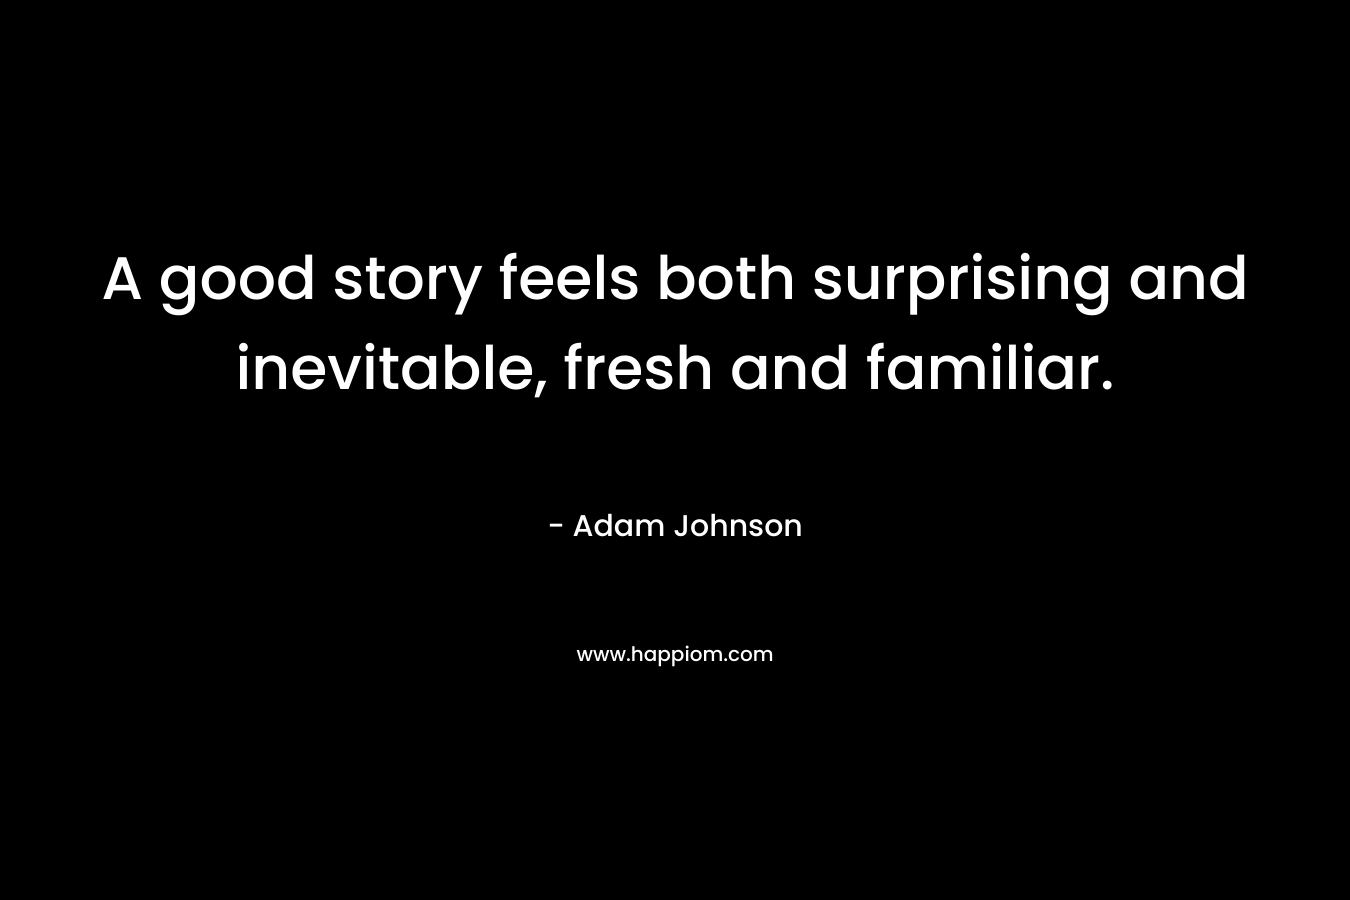 A good story feels both surprising and inevitable, fresh and familiar. – Adam Johnson